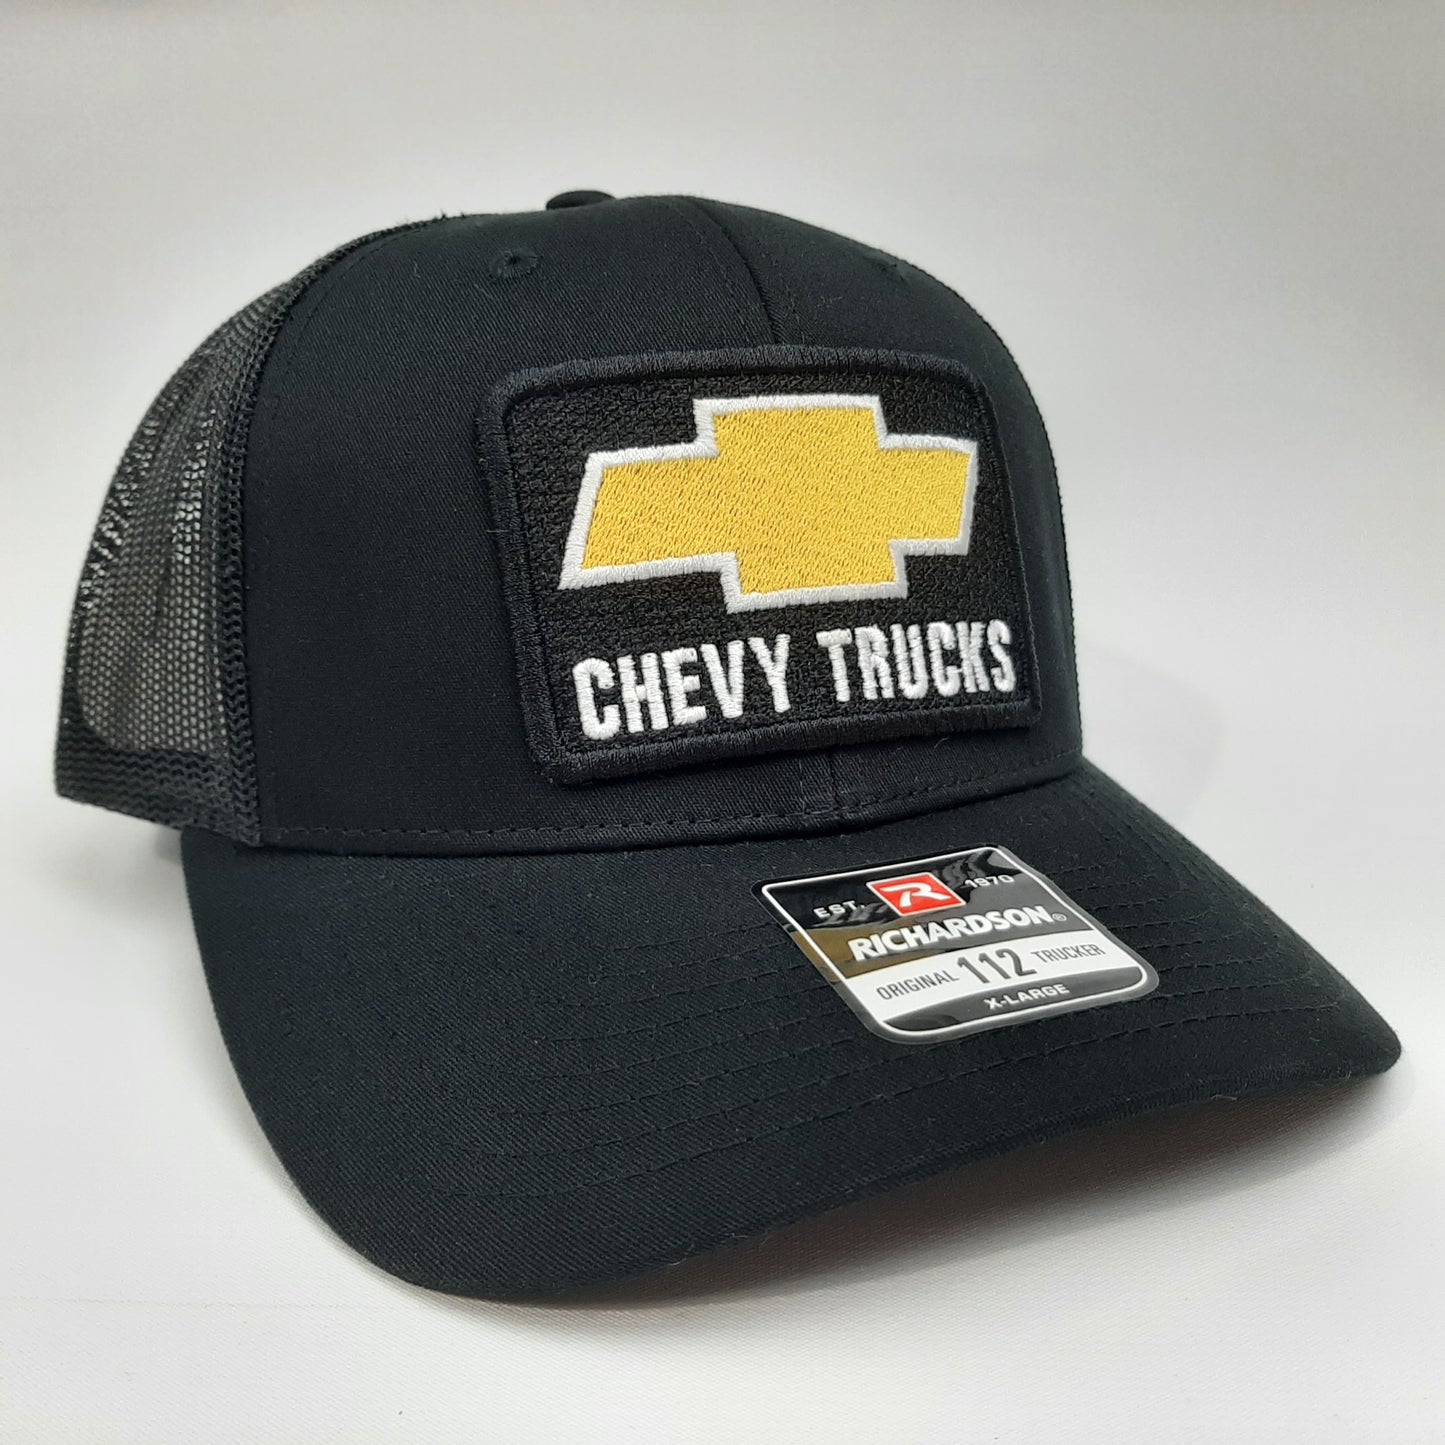 Chevy Trucks Embroidered Patch Richardson 112 Curved Bill Trucker Mesh Snapback Cap Hat Black Size XL